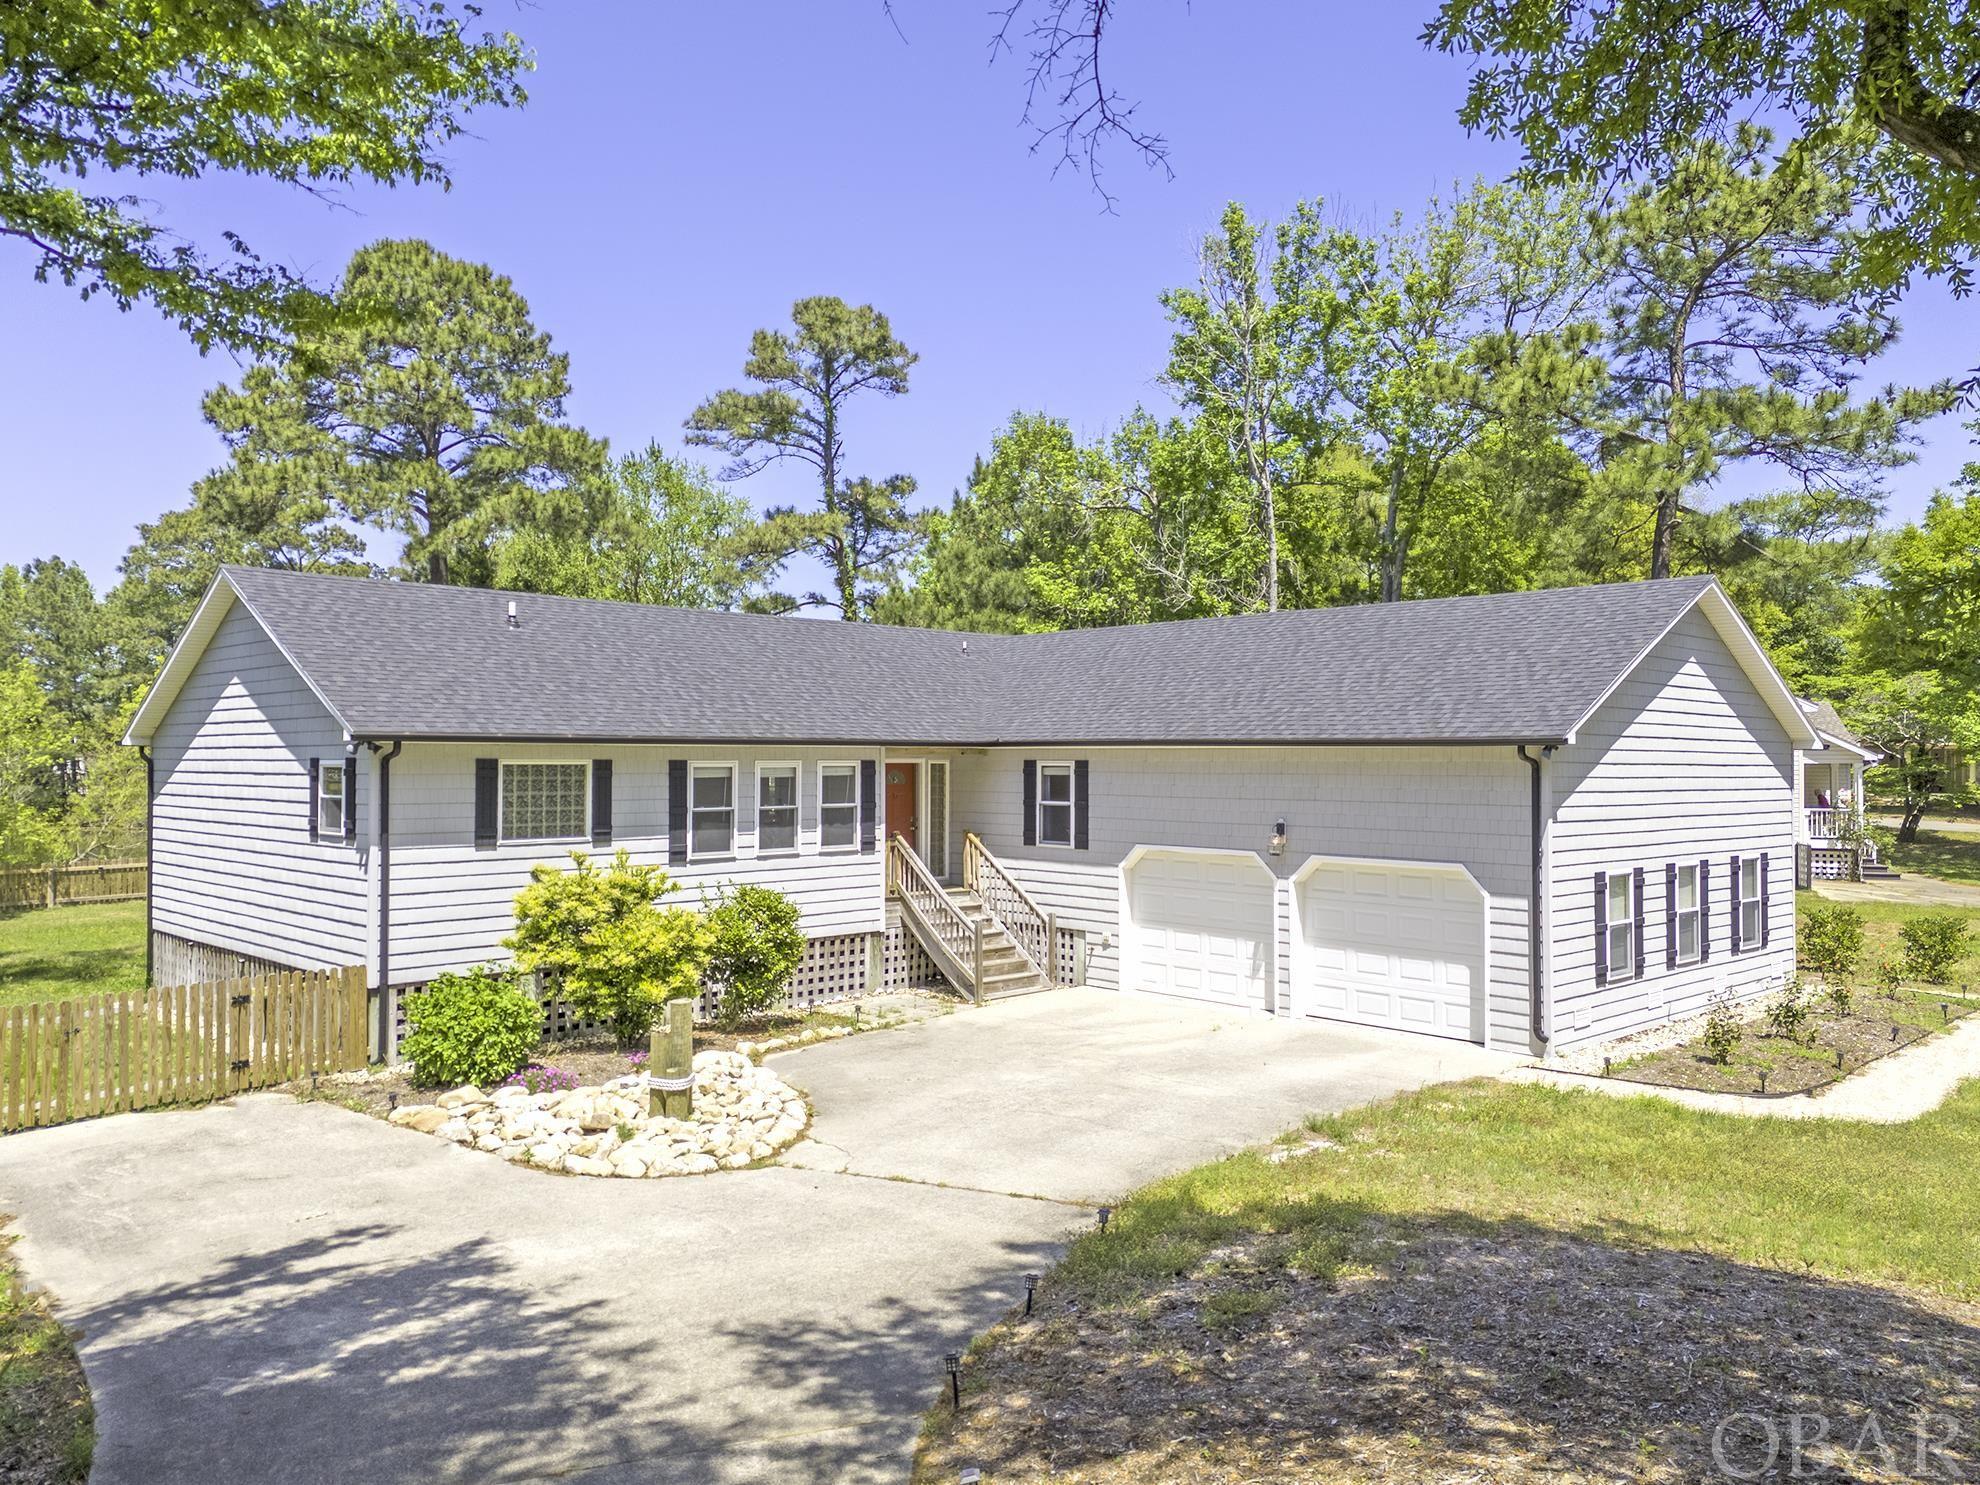 35 Pintail Trail, Southern Shores, NC 27949, 3 Bedrooms Bedrooms, ,2 BathroomsBathrooms,Residential,For sale,Pintail Trail,125499